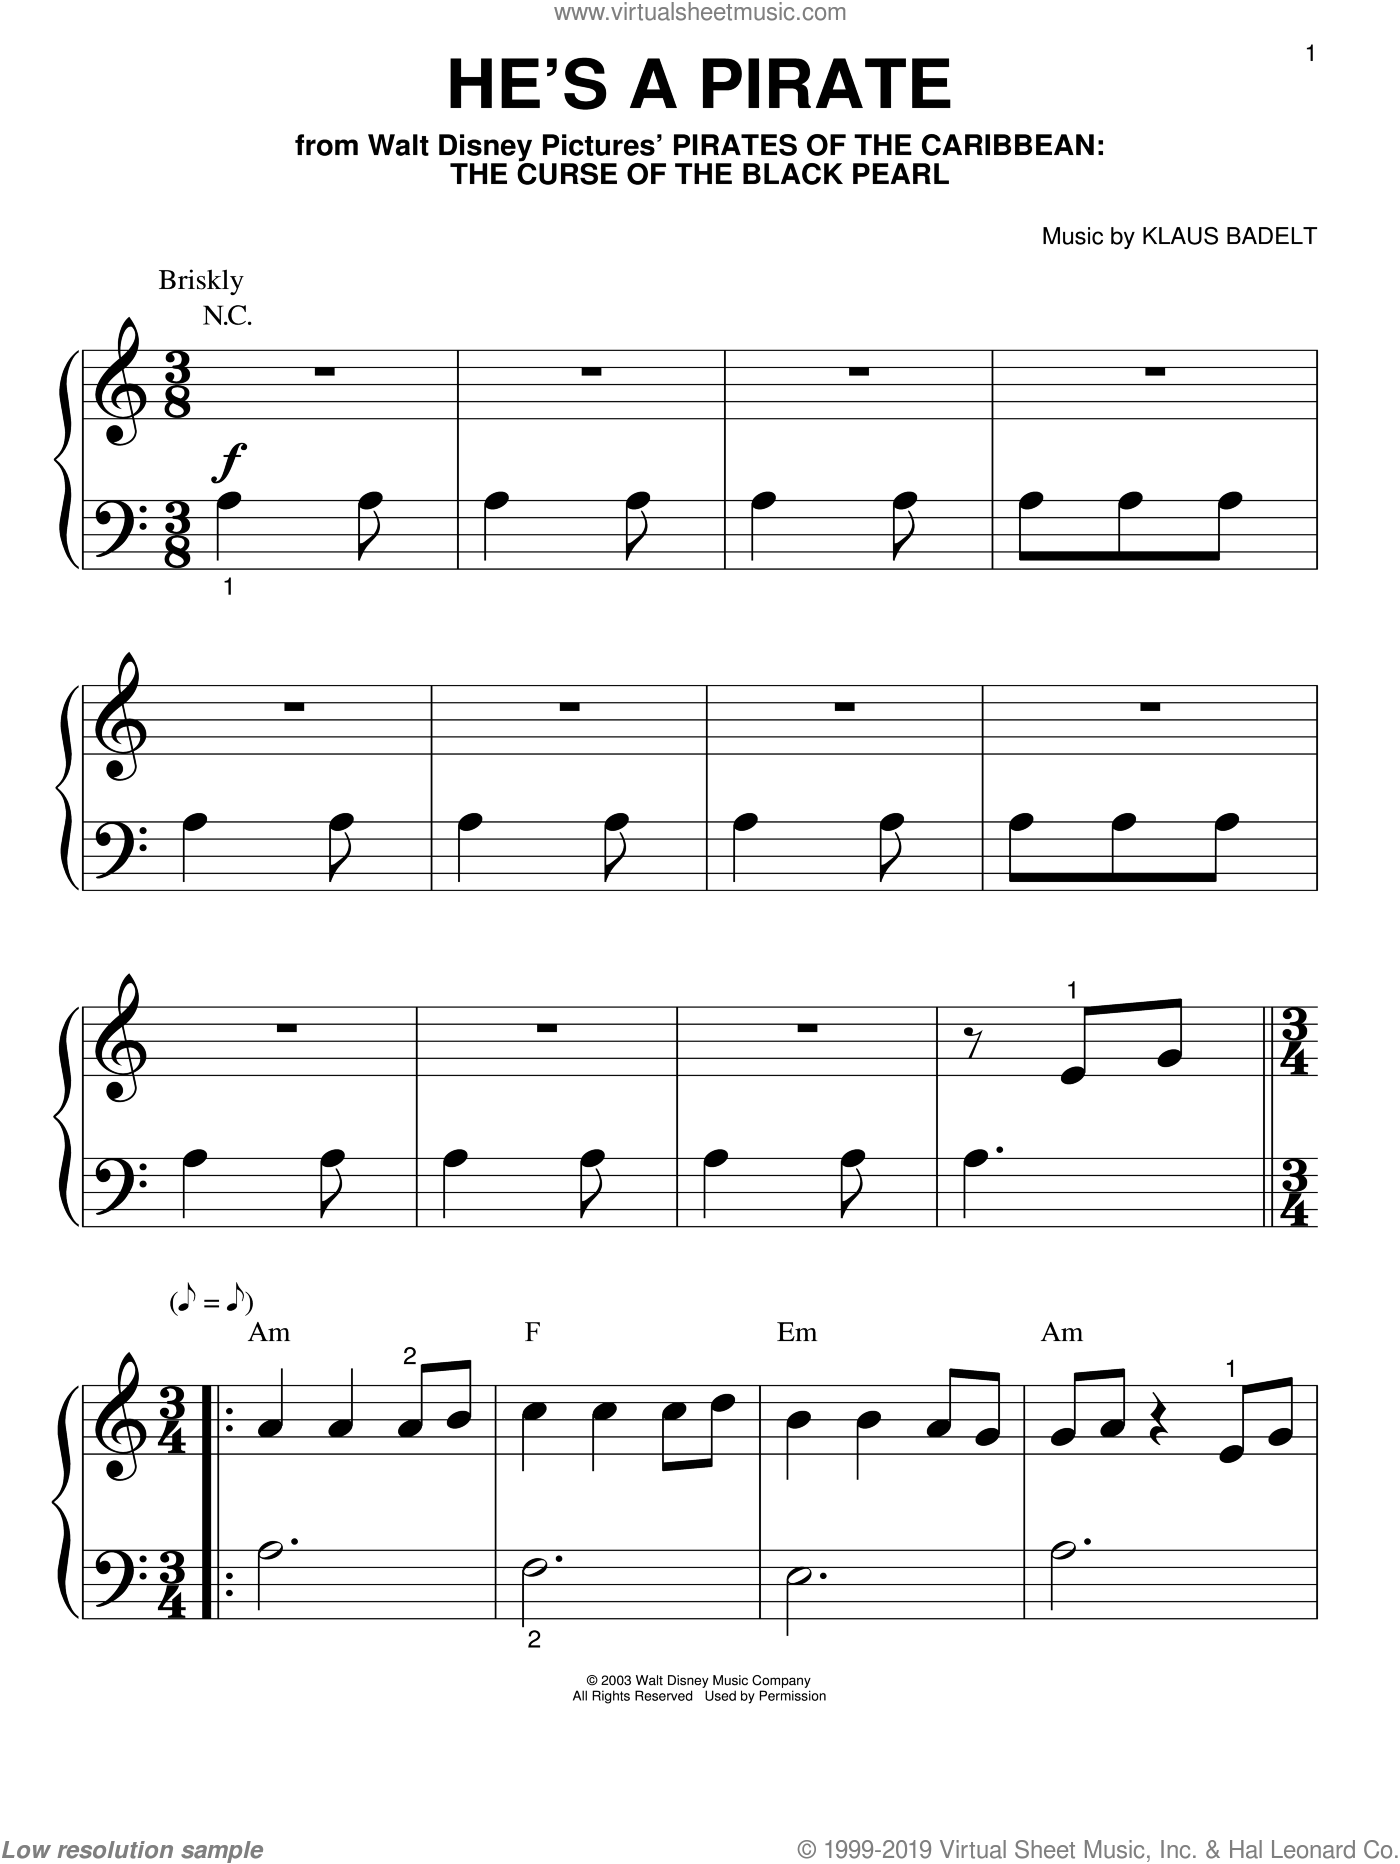 Badelt - He's A Pirate sheet music for piano solo (big ...